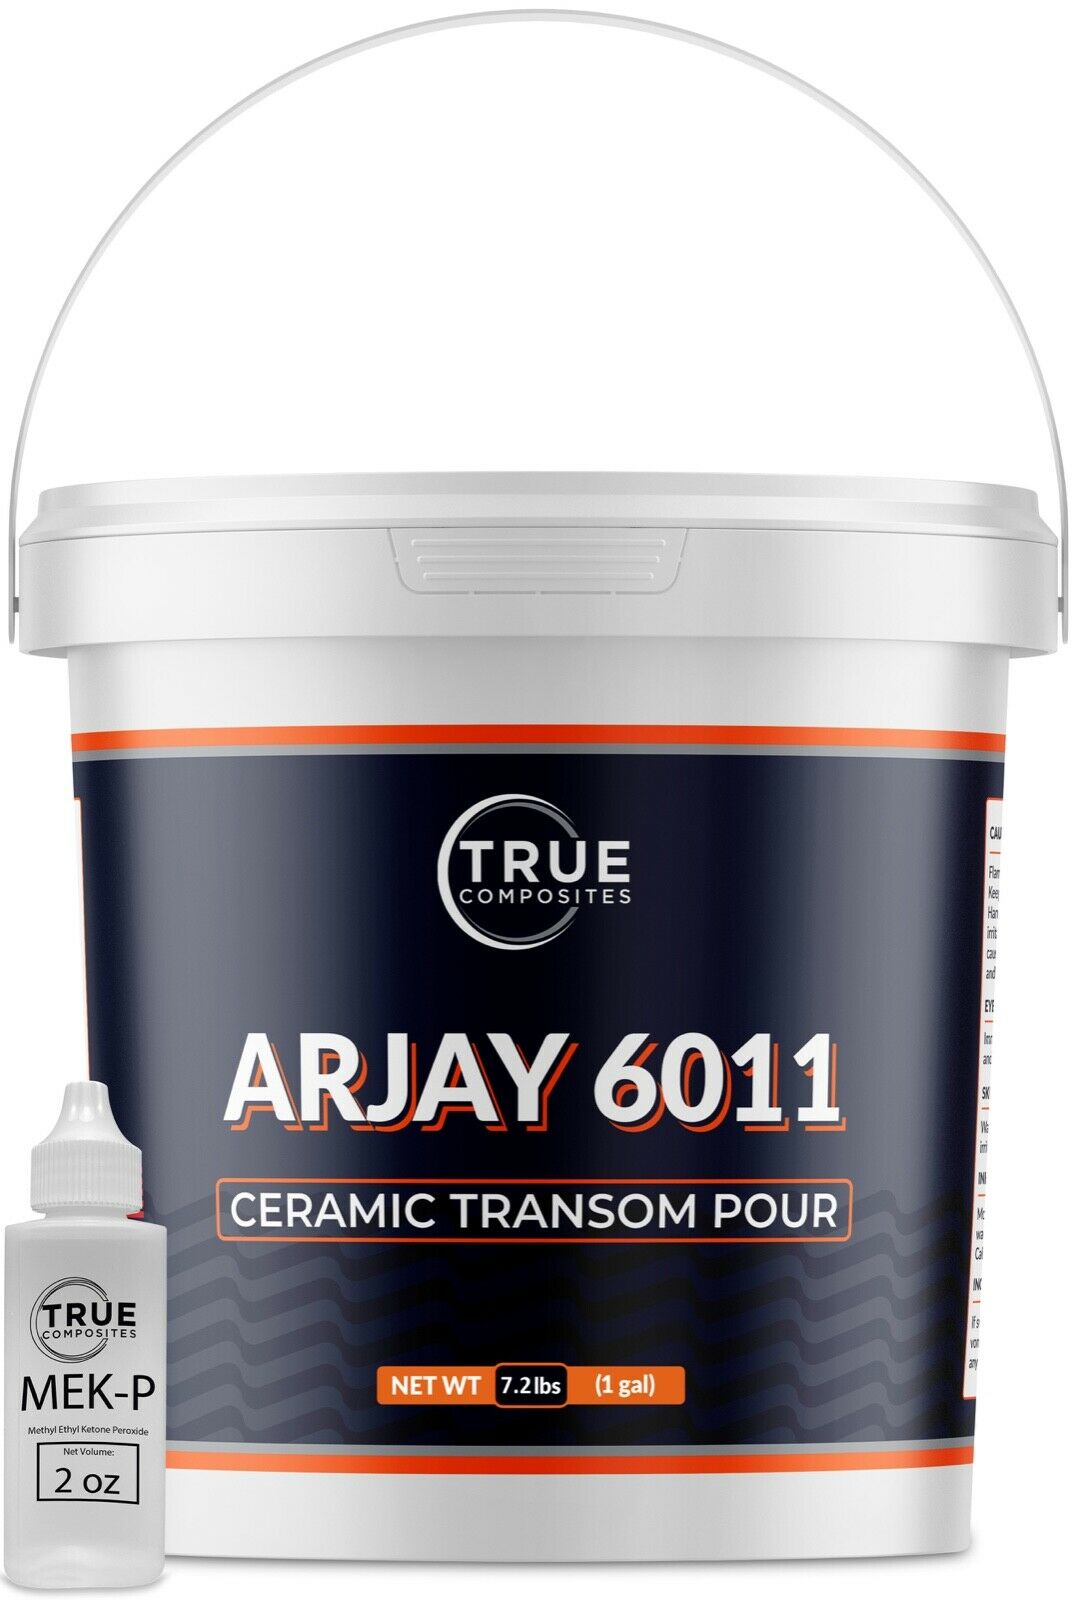 Arjay 6011 Ceramic Pourable Compound Transom Putty - Transom Pour